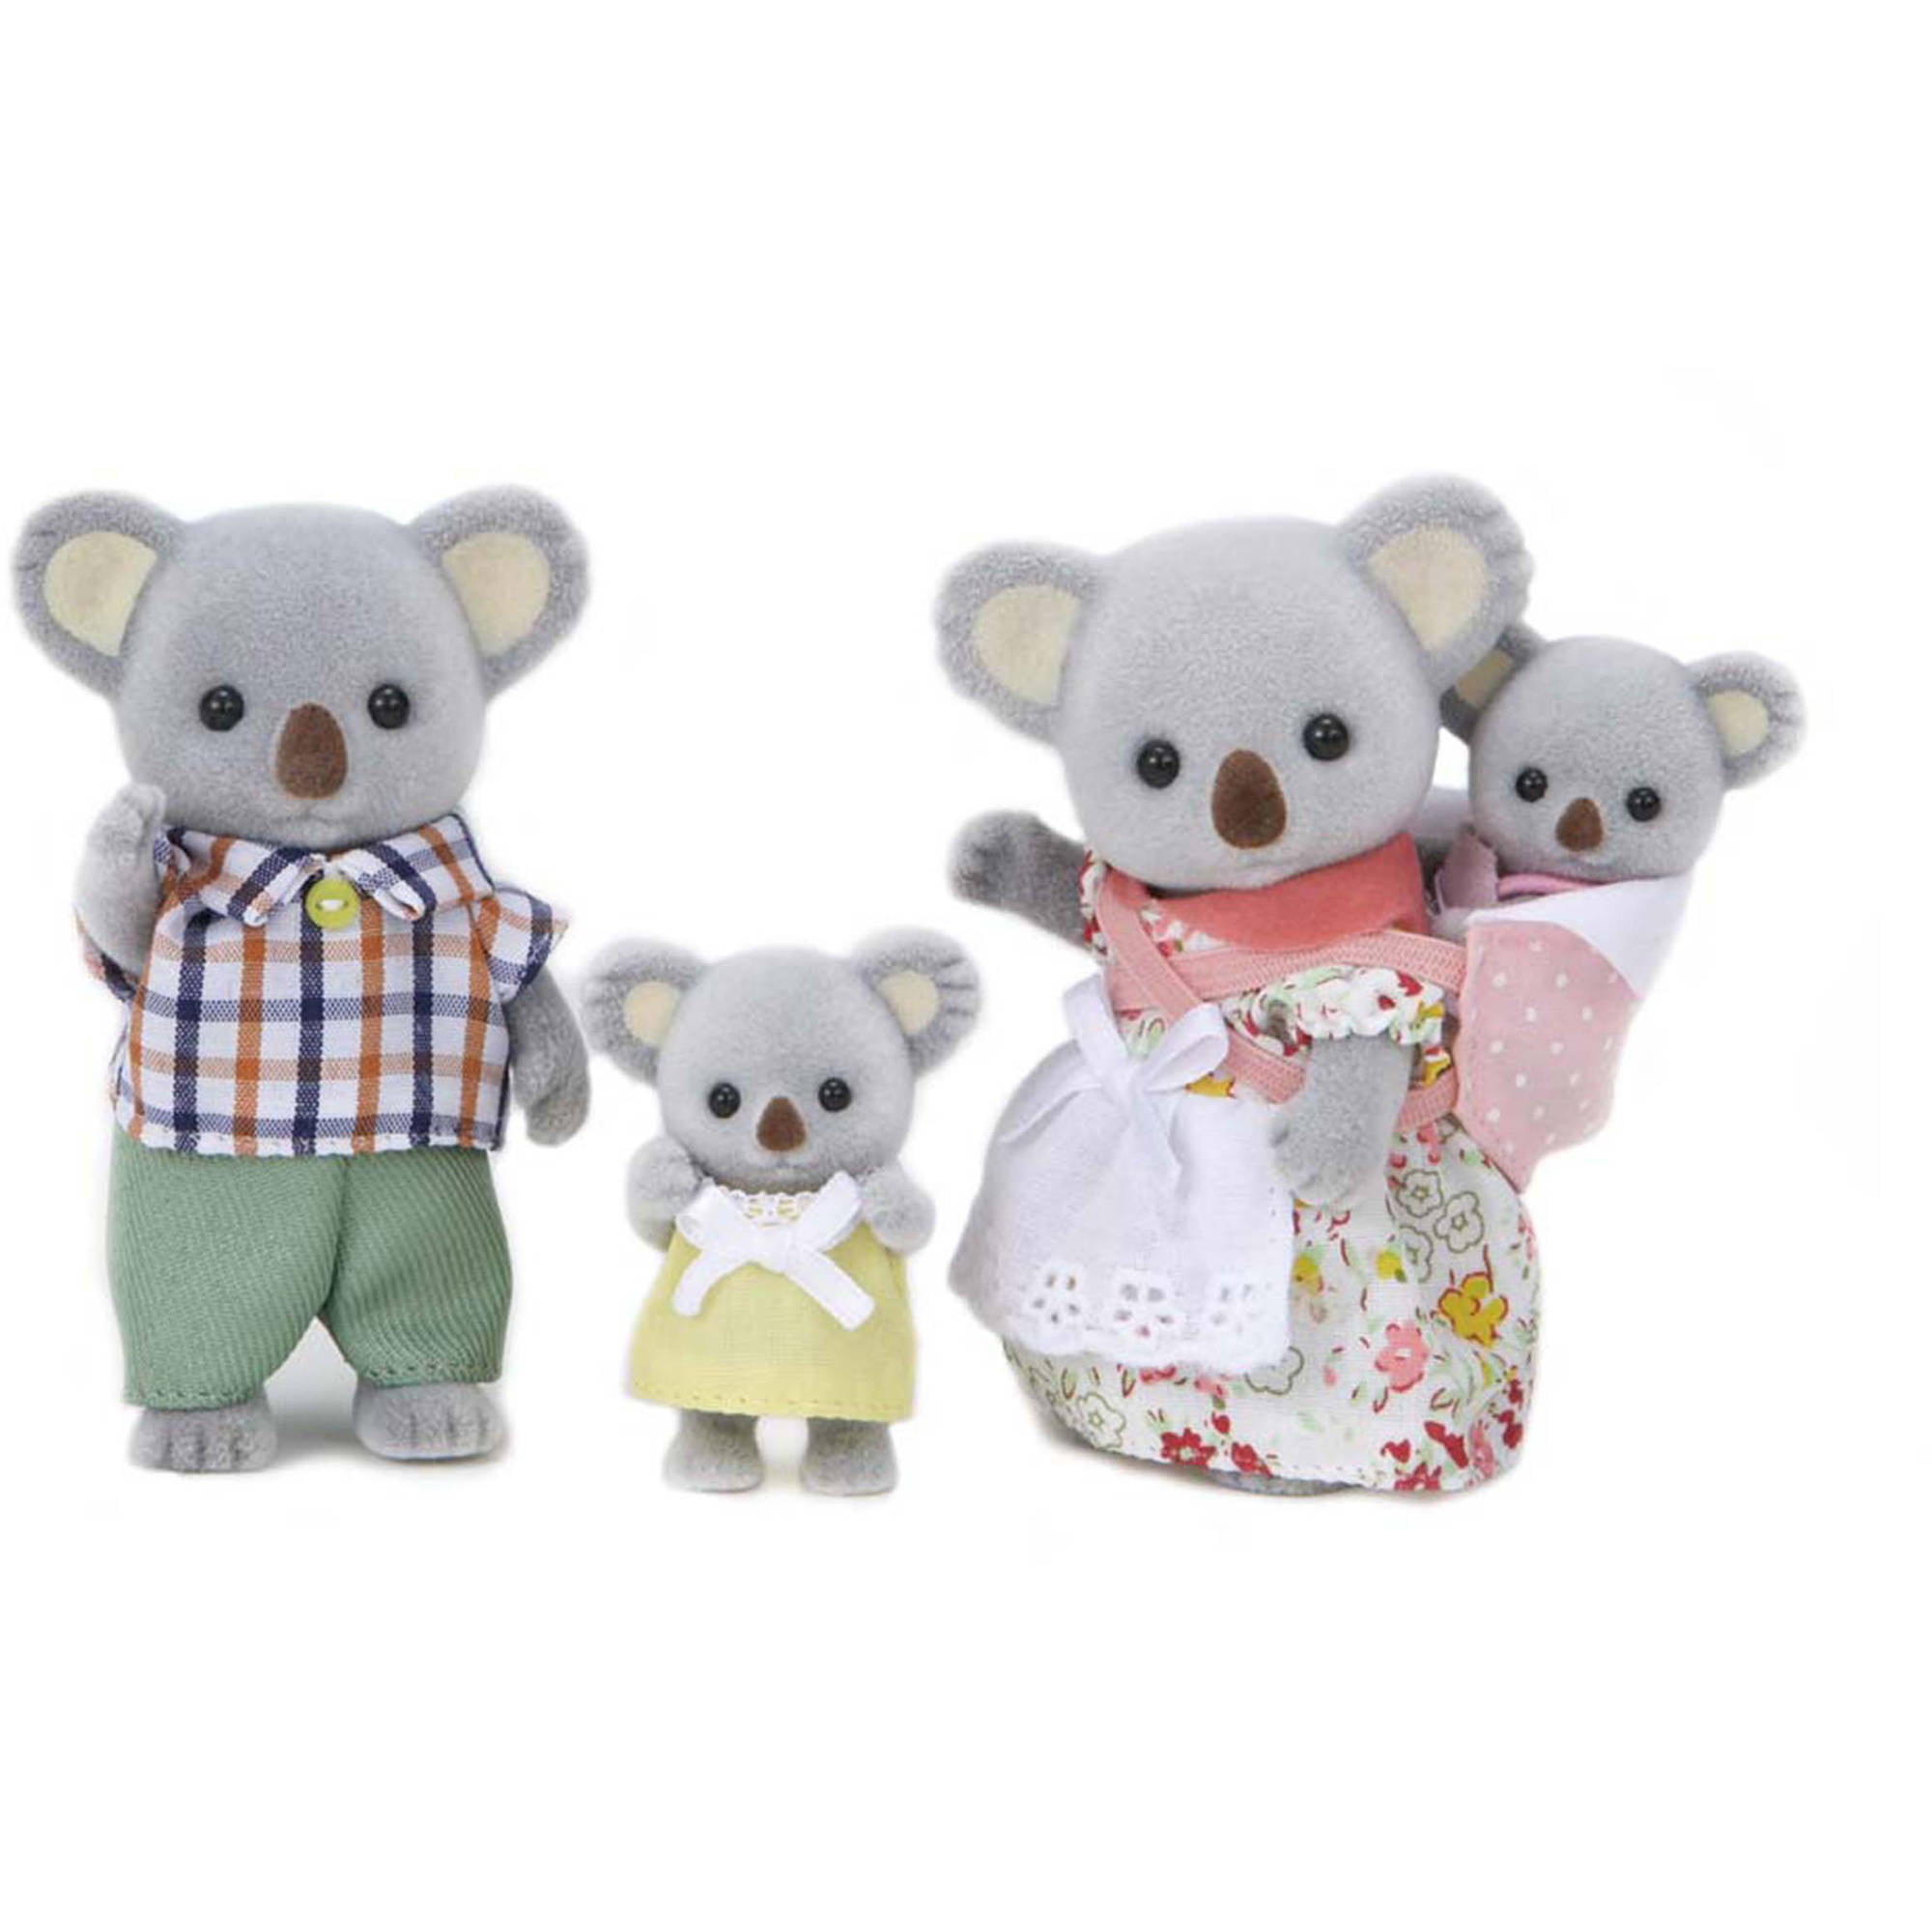 NEW Calico Critters 3 Pc Figures Doll Set Mom Dad Baby Outback Koala Family 